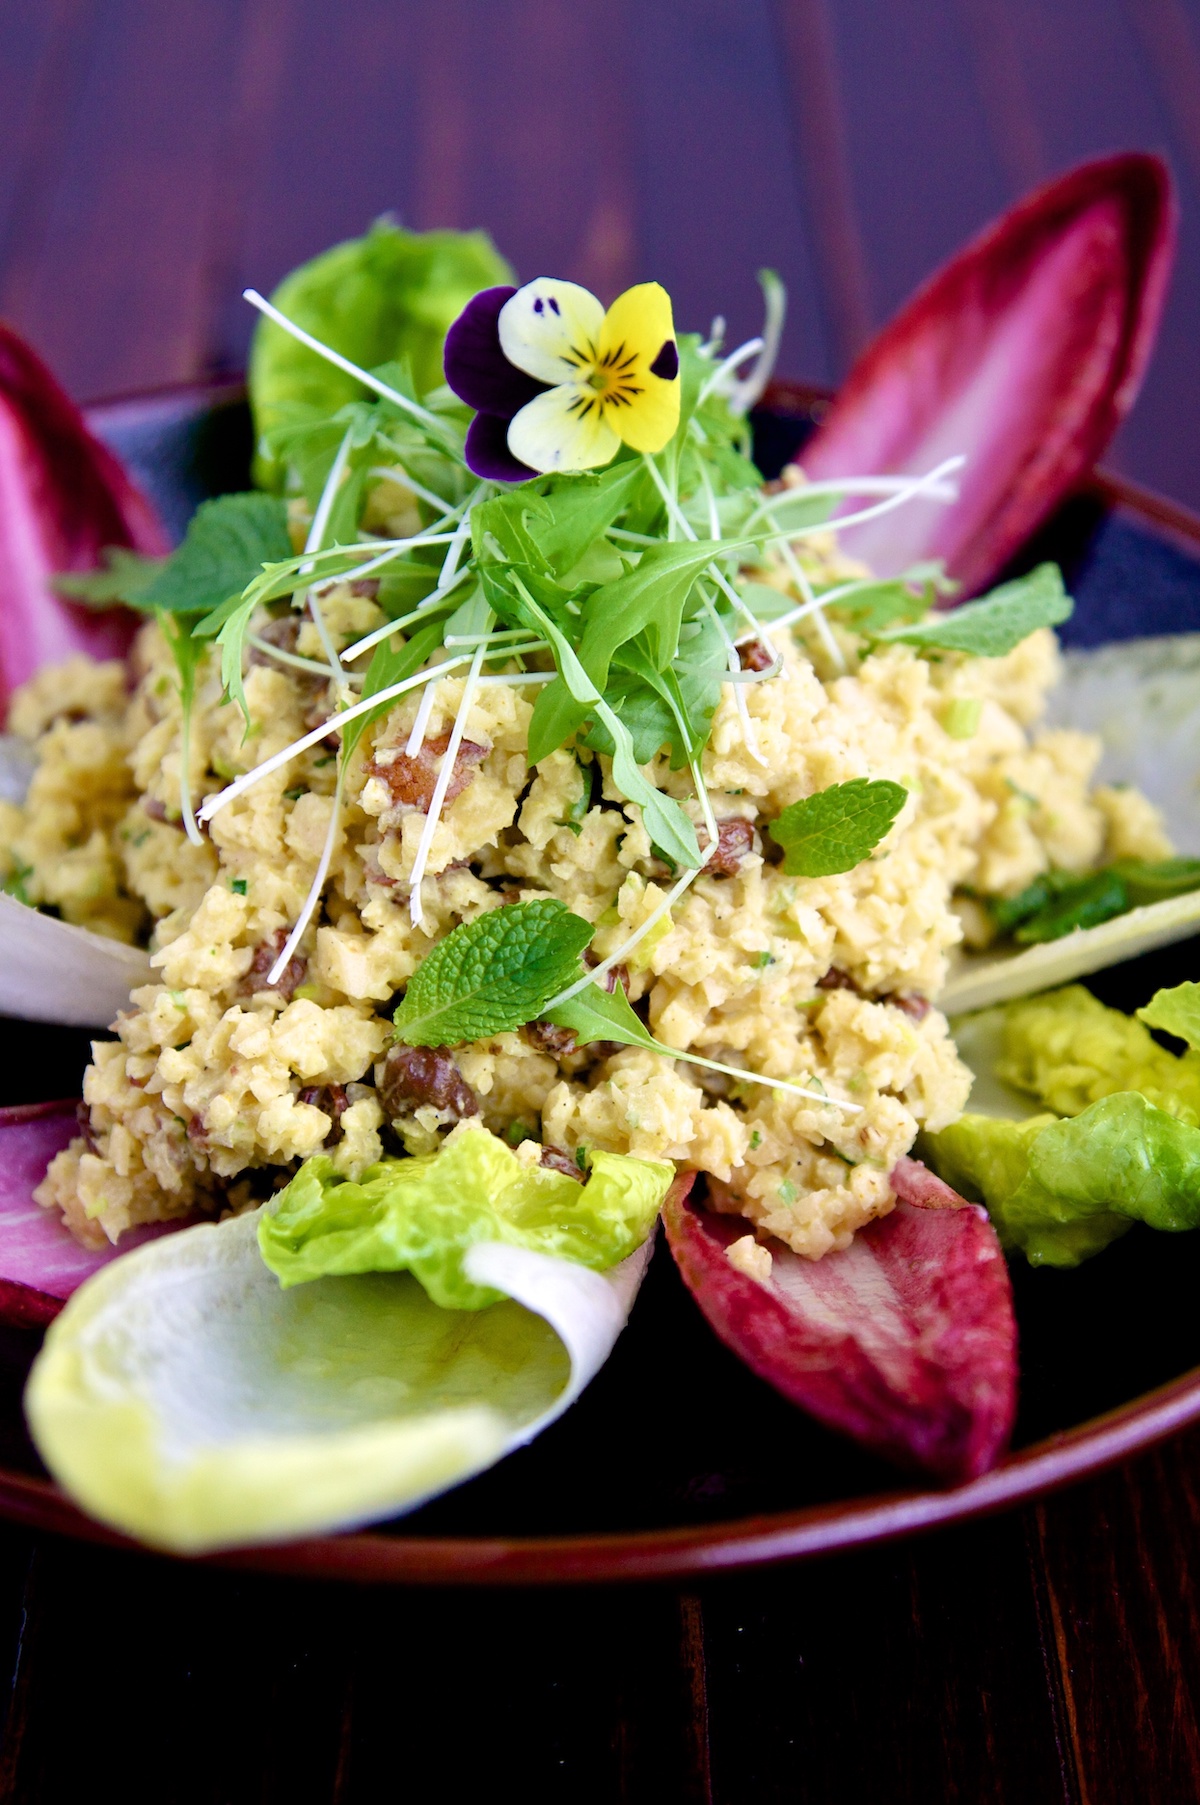 Raw food recipe of curried swede risotto on a brown place and wooden background